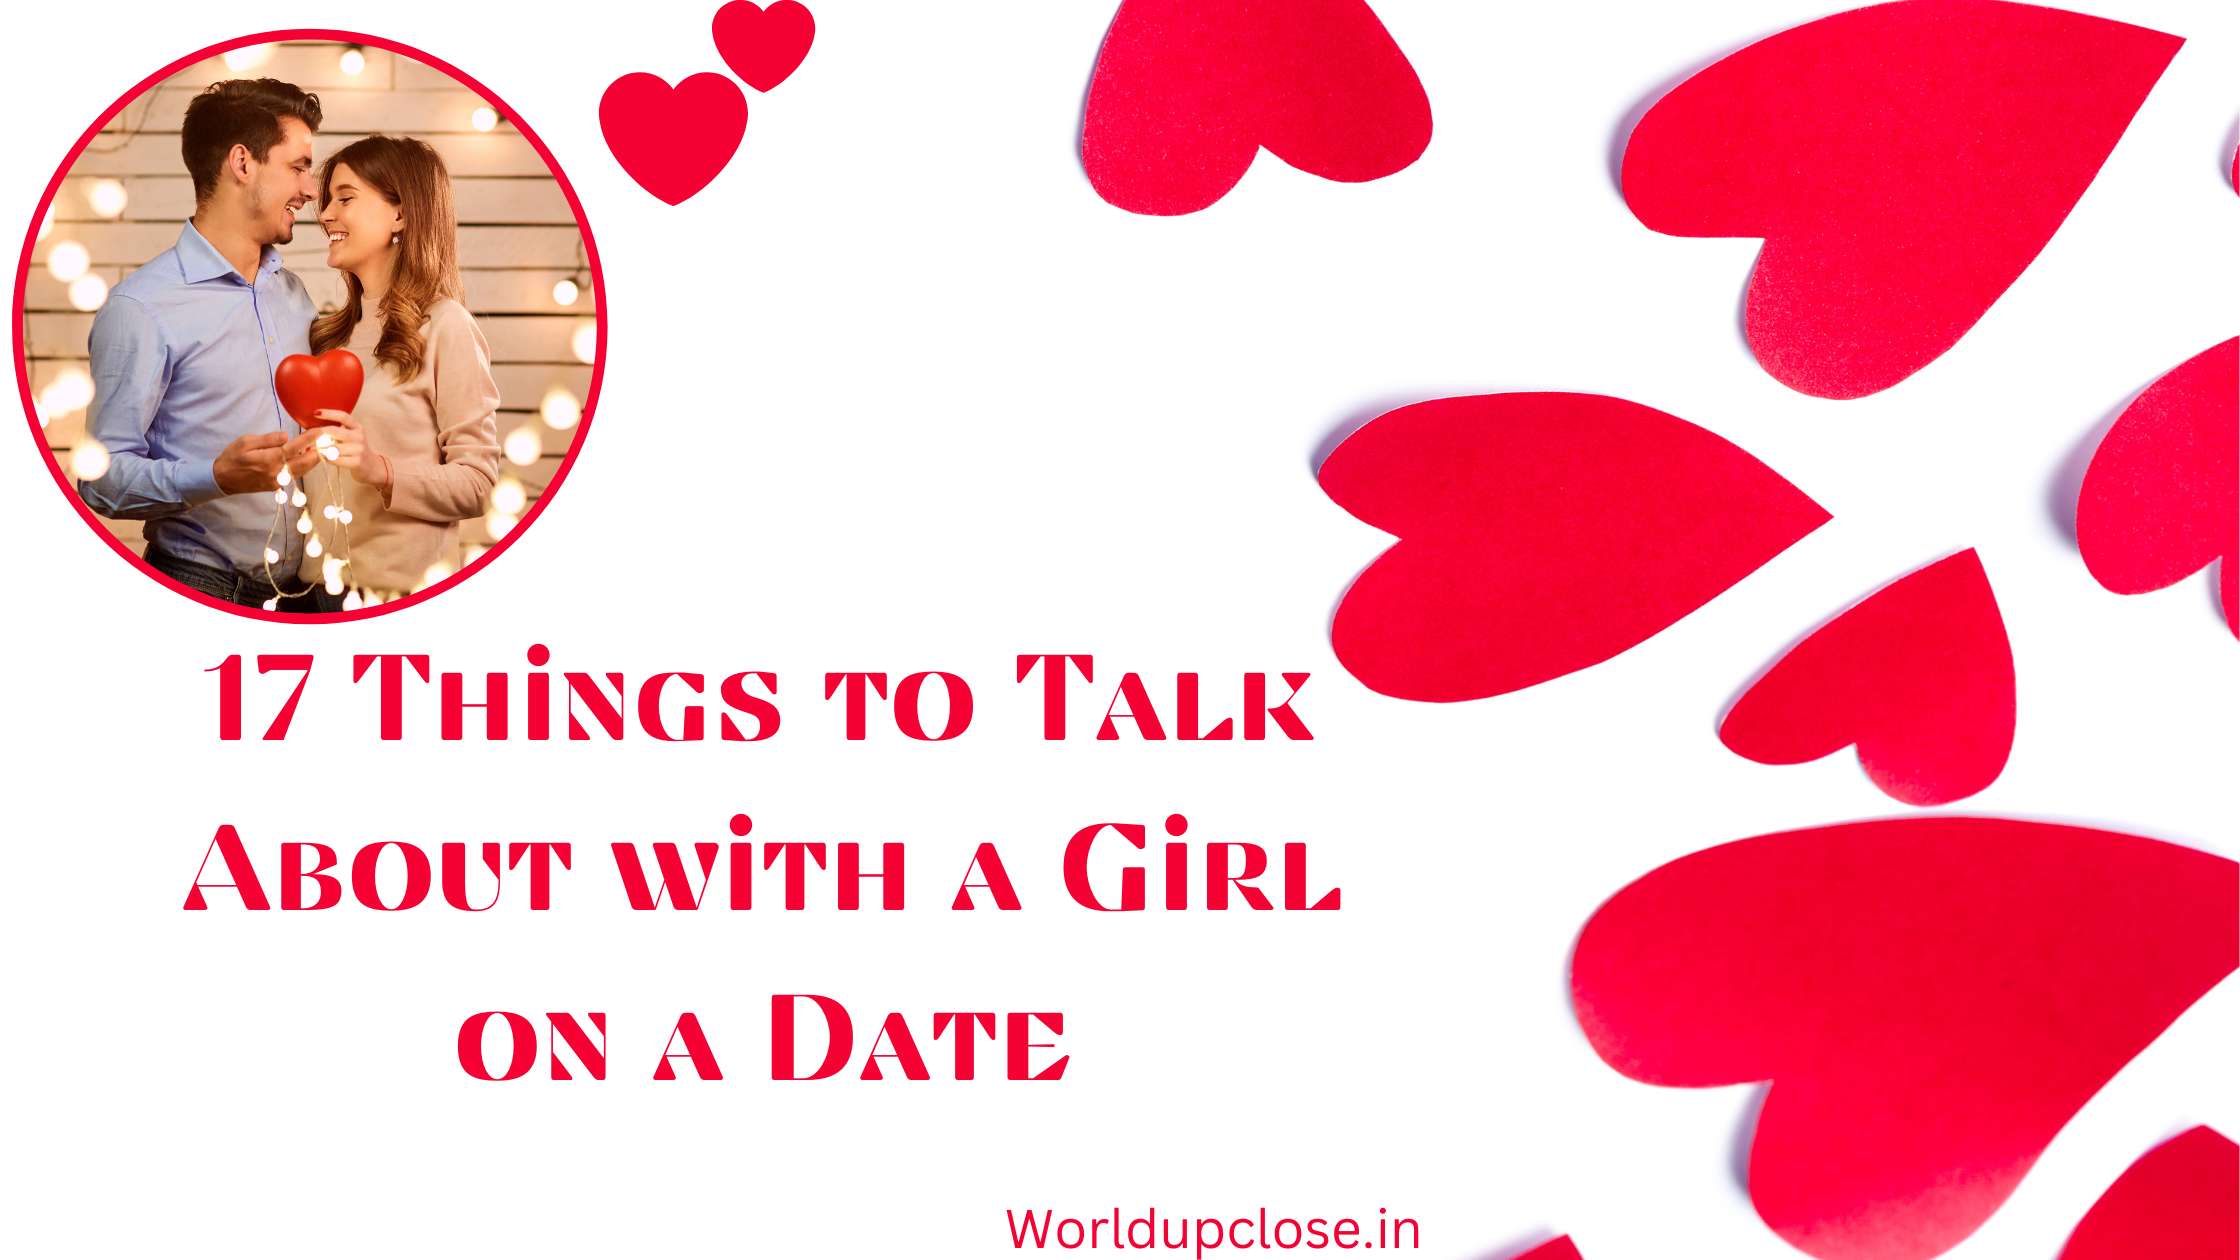 17 Things to Talk About with a Girl on a Date 3